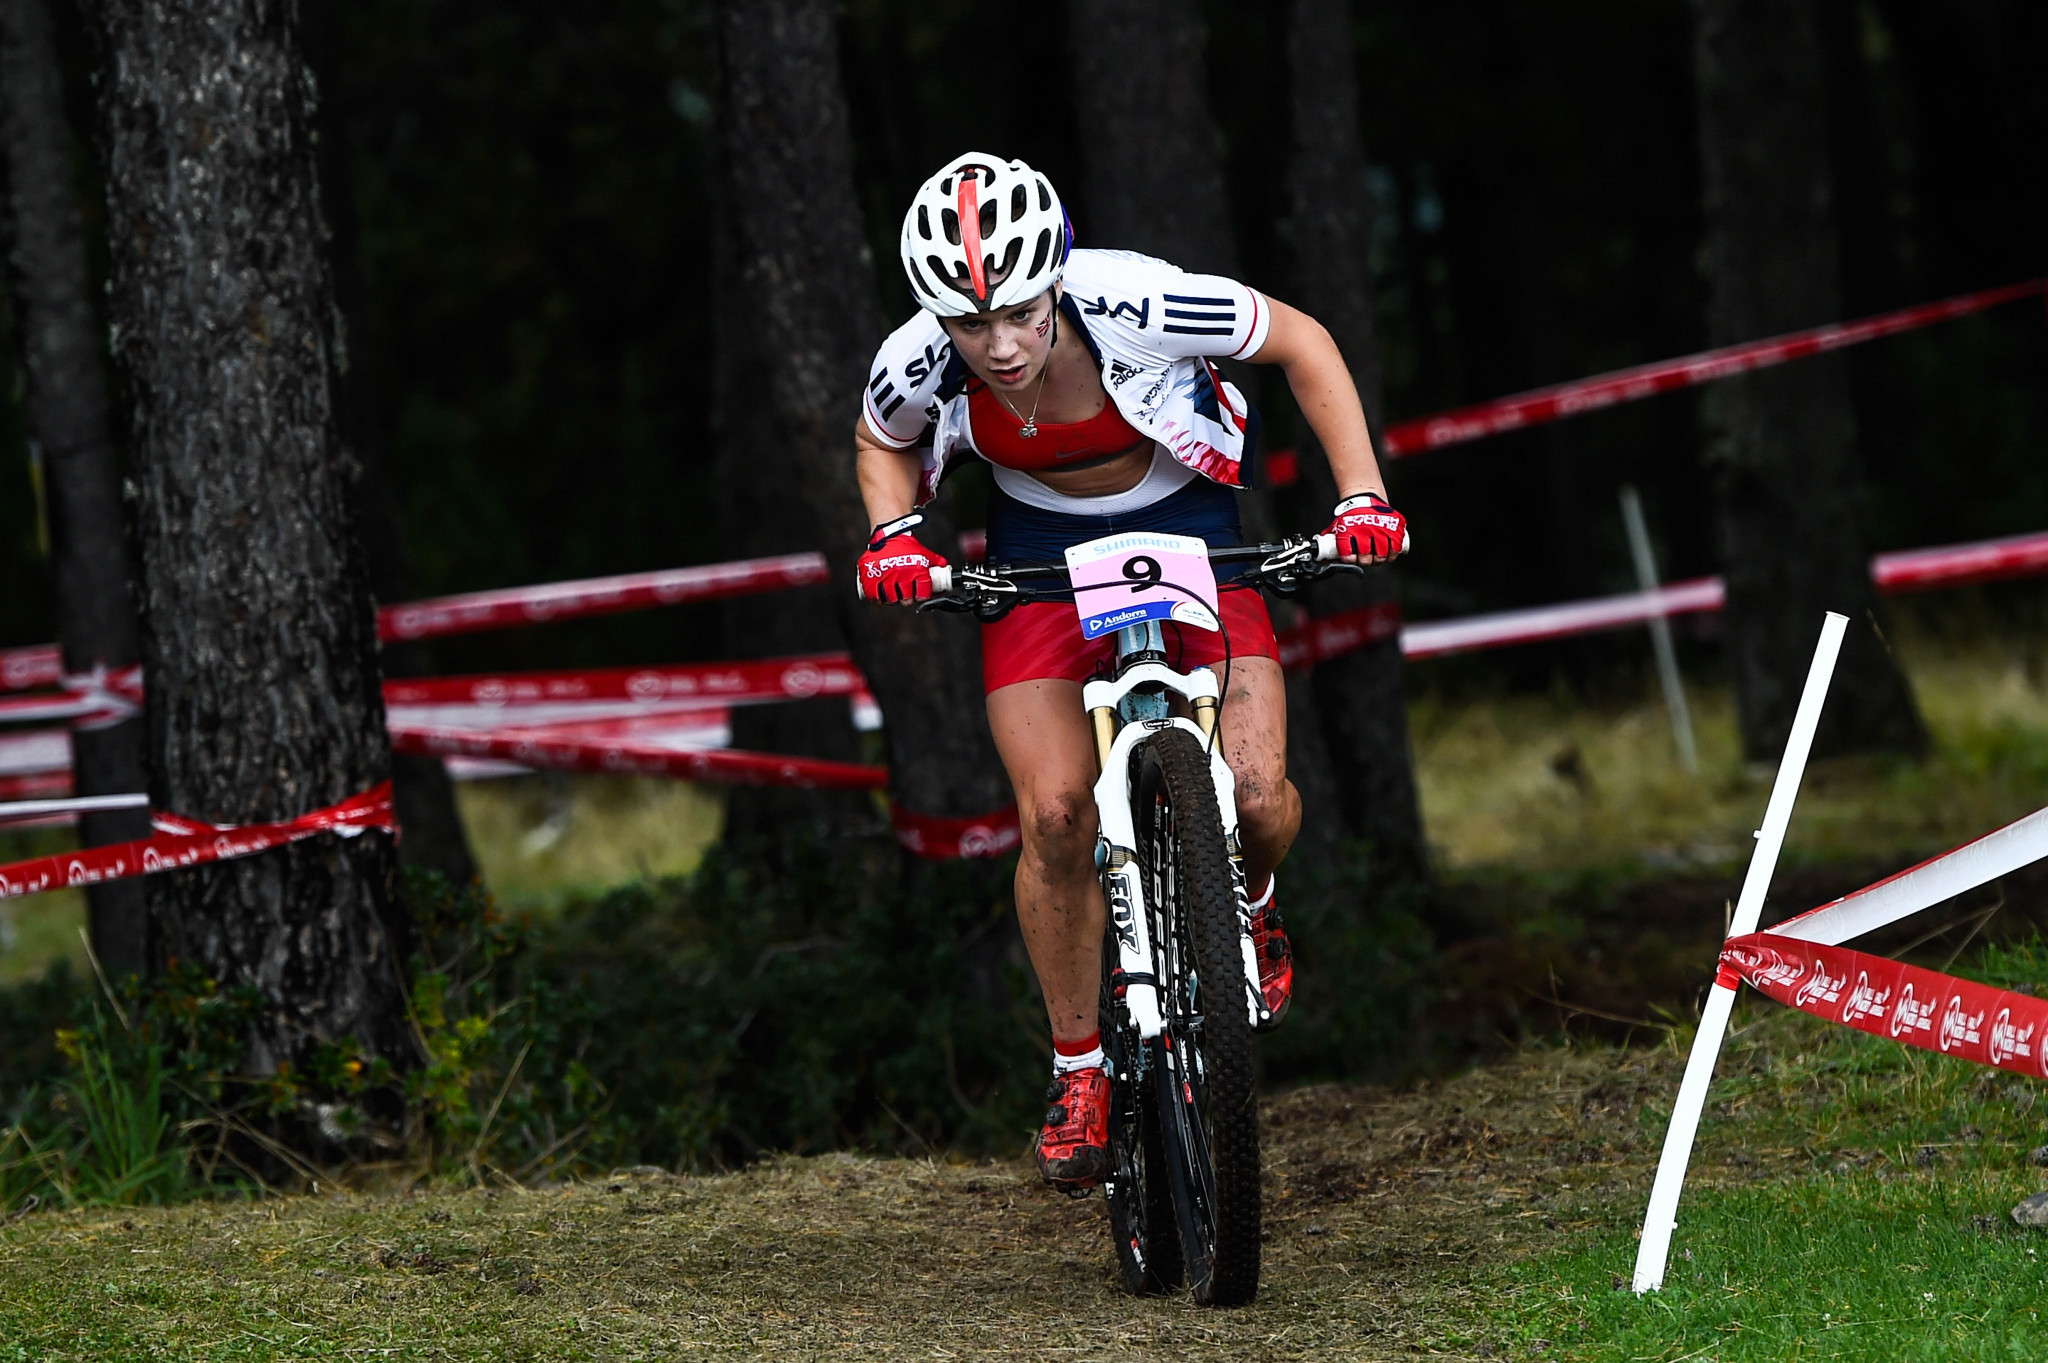 Under-23 world champion Evie Richards will compete in the women's mountain bike event ©Getty Images